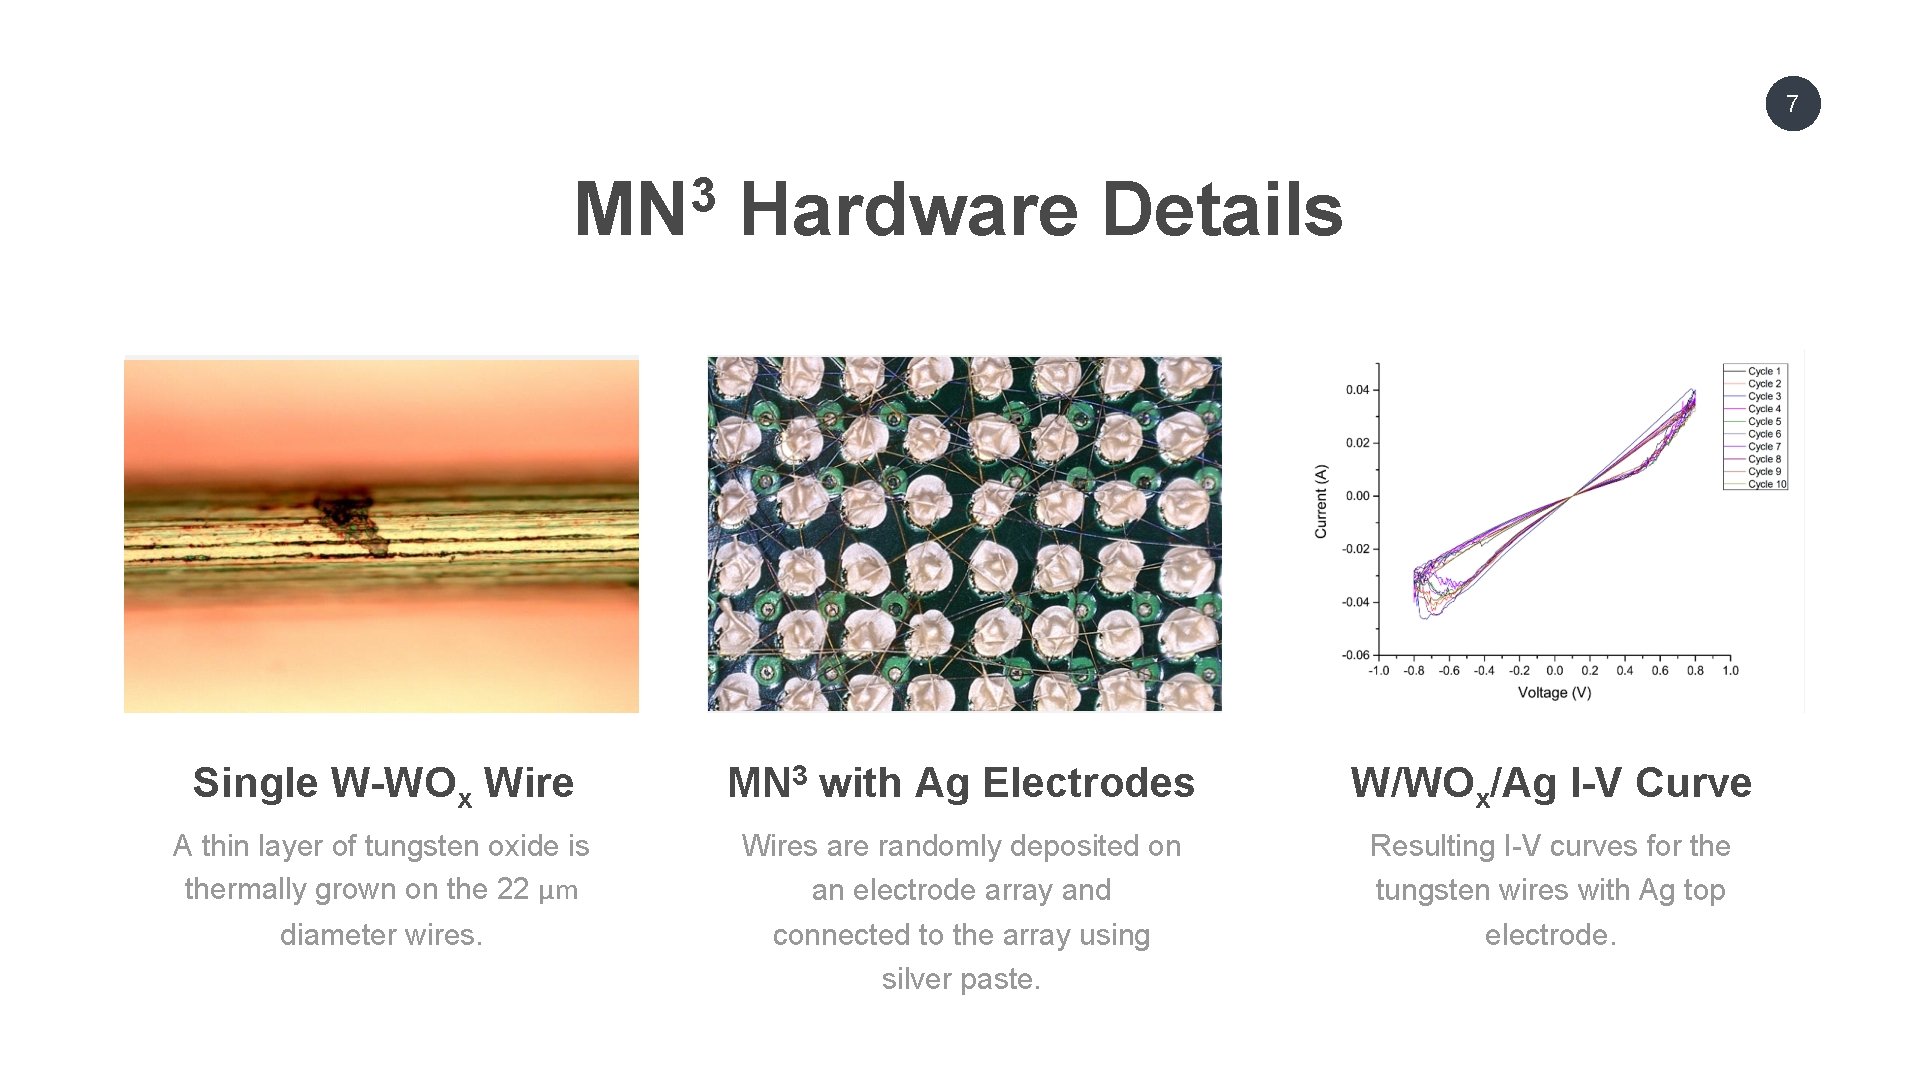 7 3 MN Hardware Details Single W-WOx Wire MN 3 with Ag Electrodes W/WOx/Ag